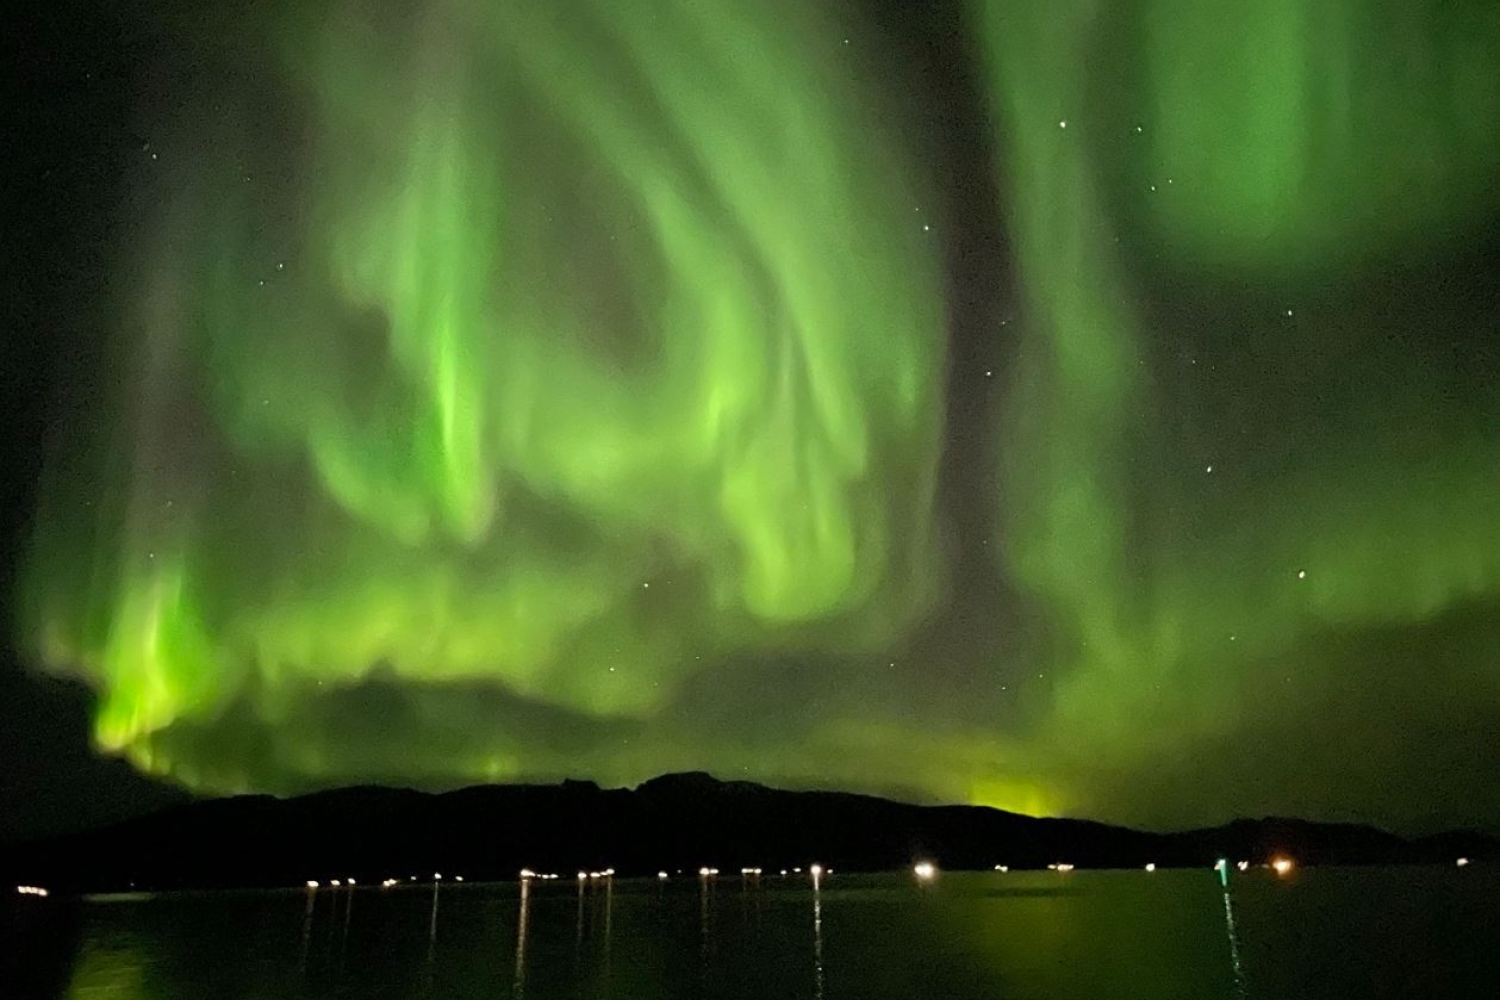 The sky full of Northern Lights